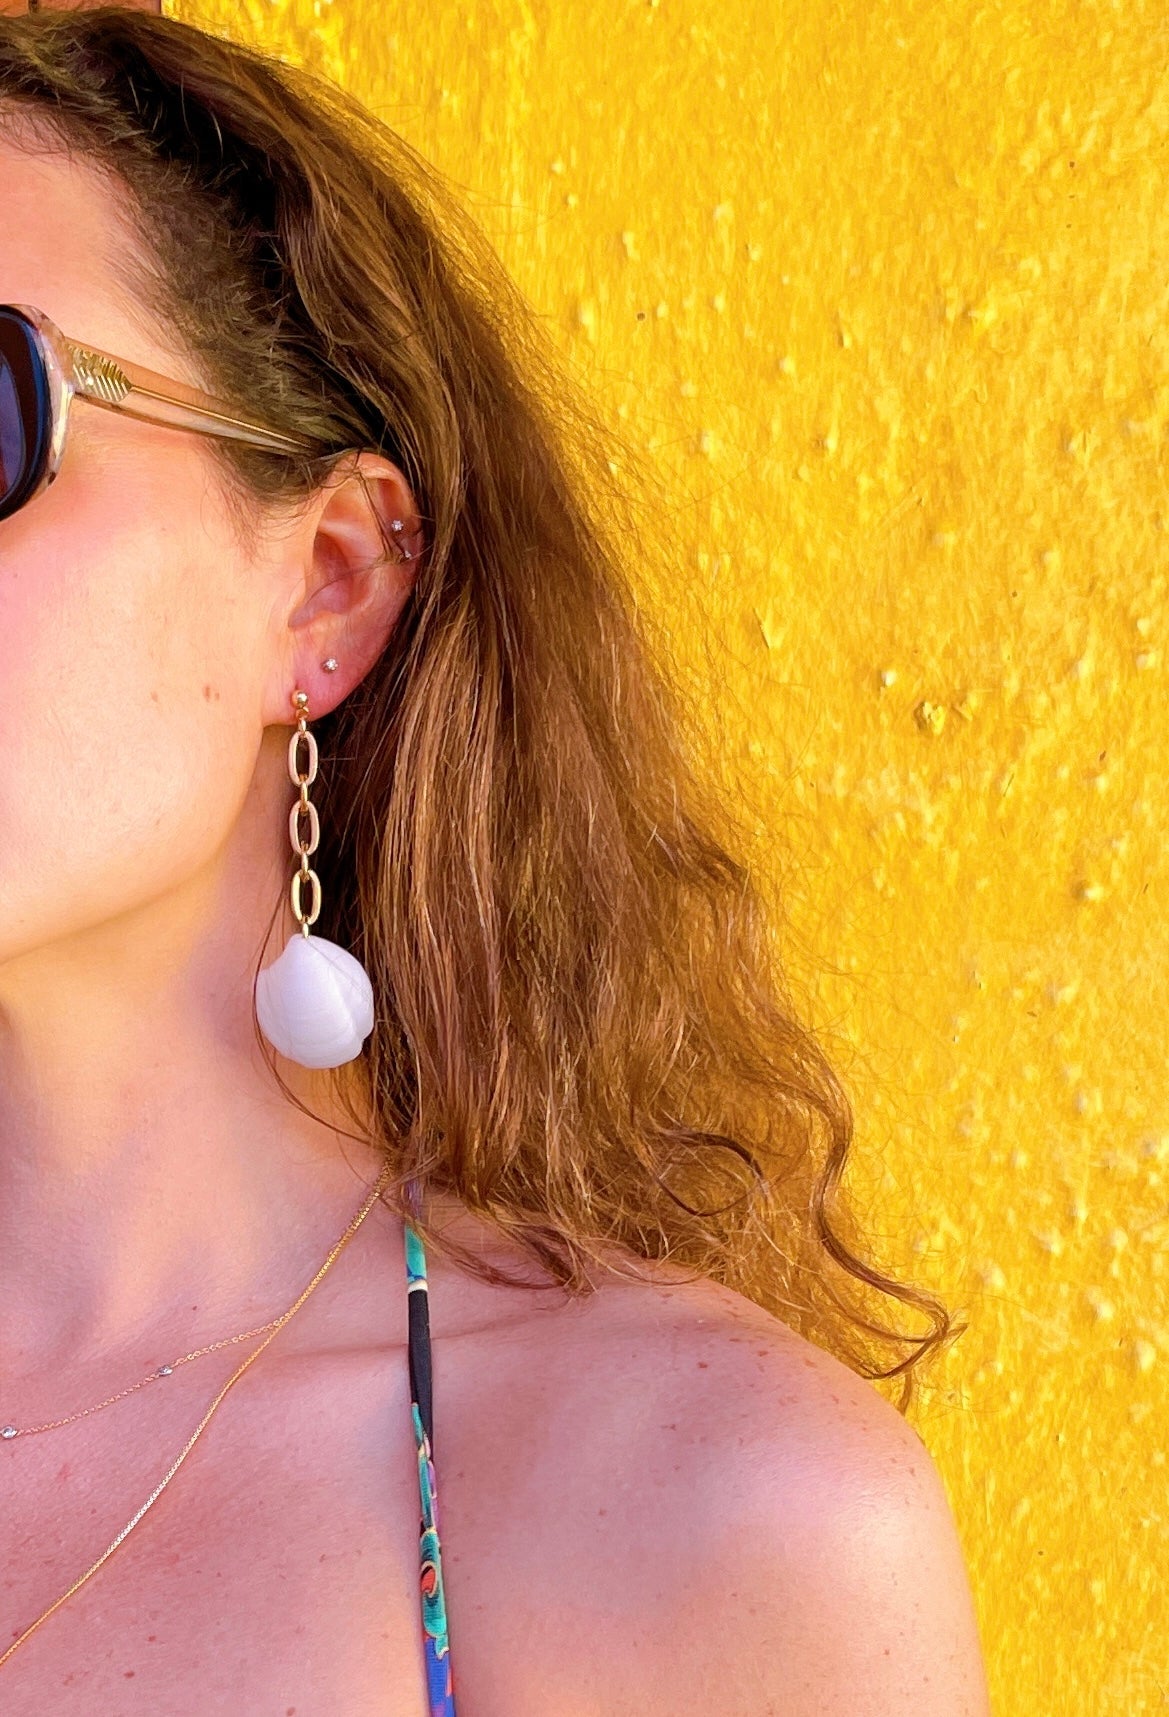 The Tinx Shell Earrings by Reshelled